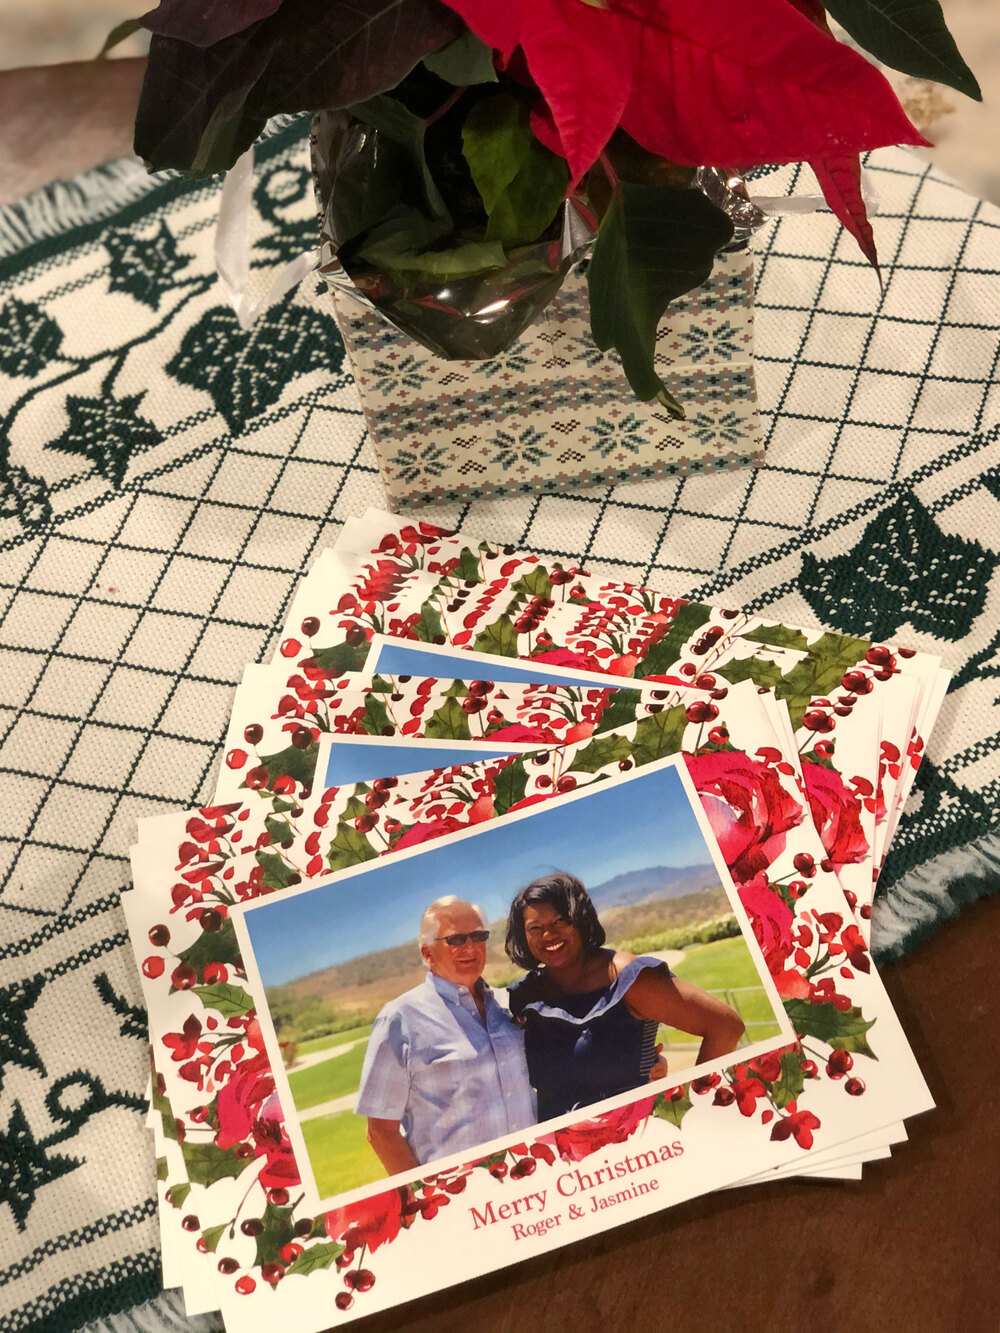 Holiday Bouquet Border Photo Cards